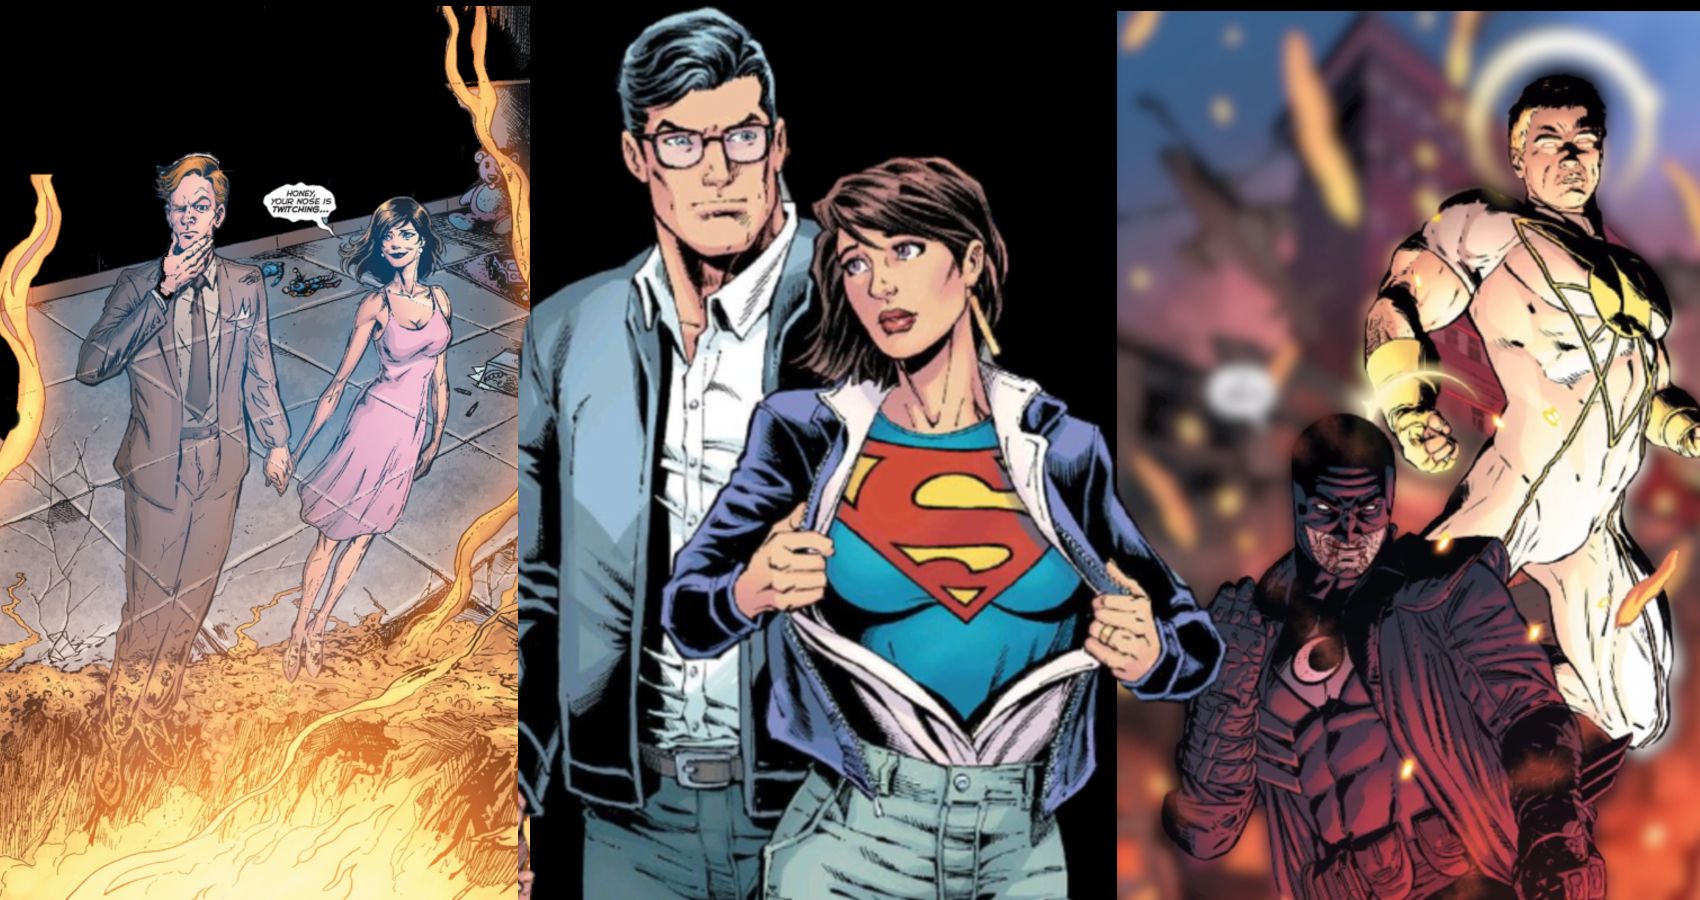 Couple in the DC comics universe.